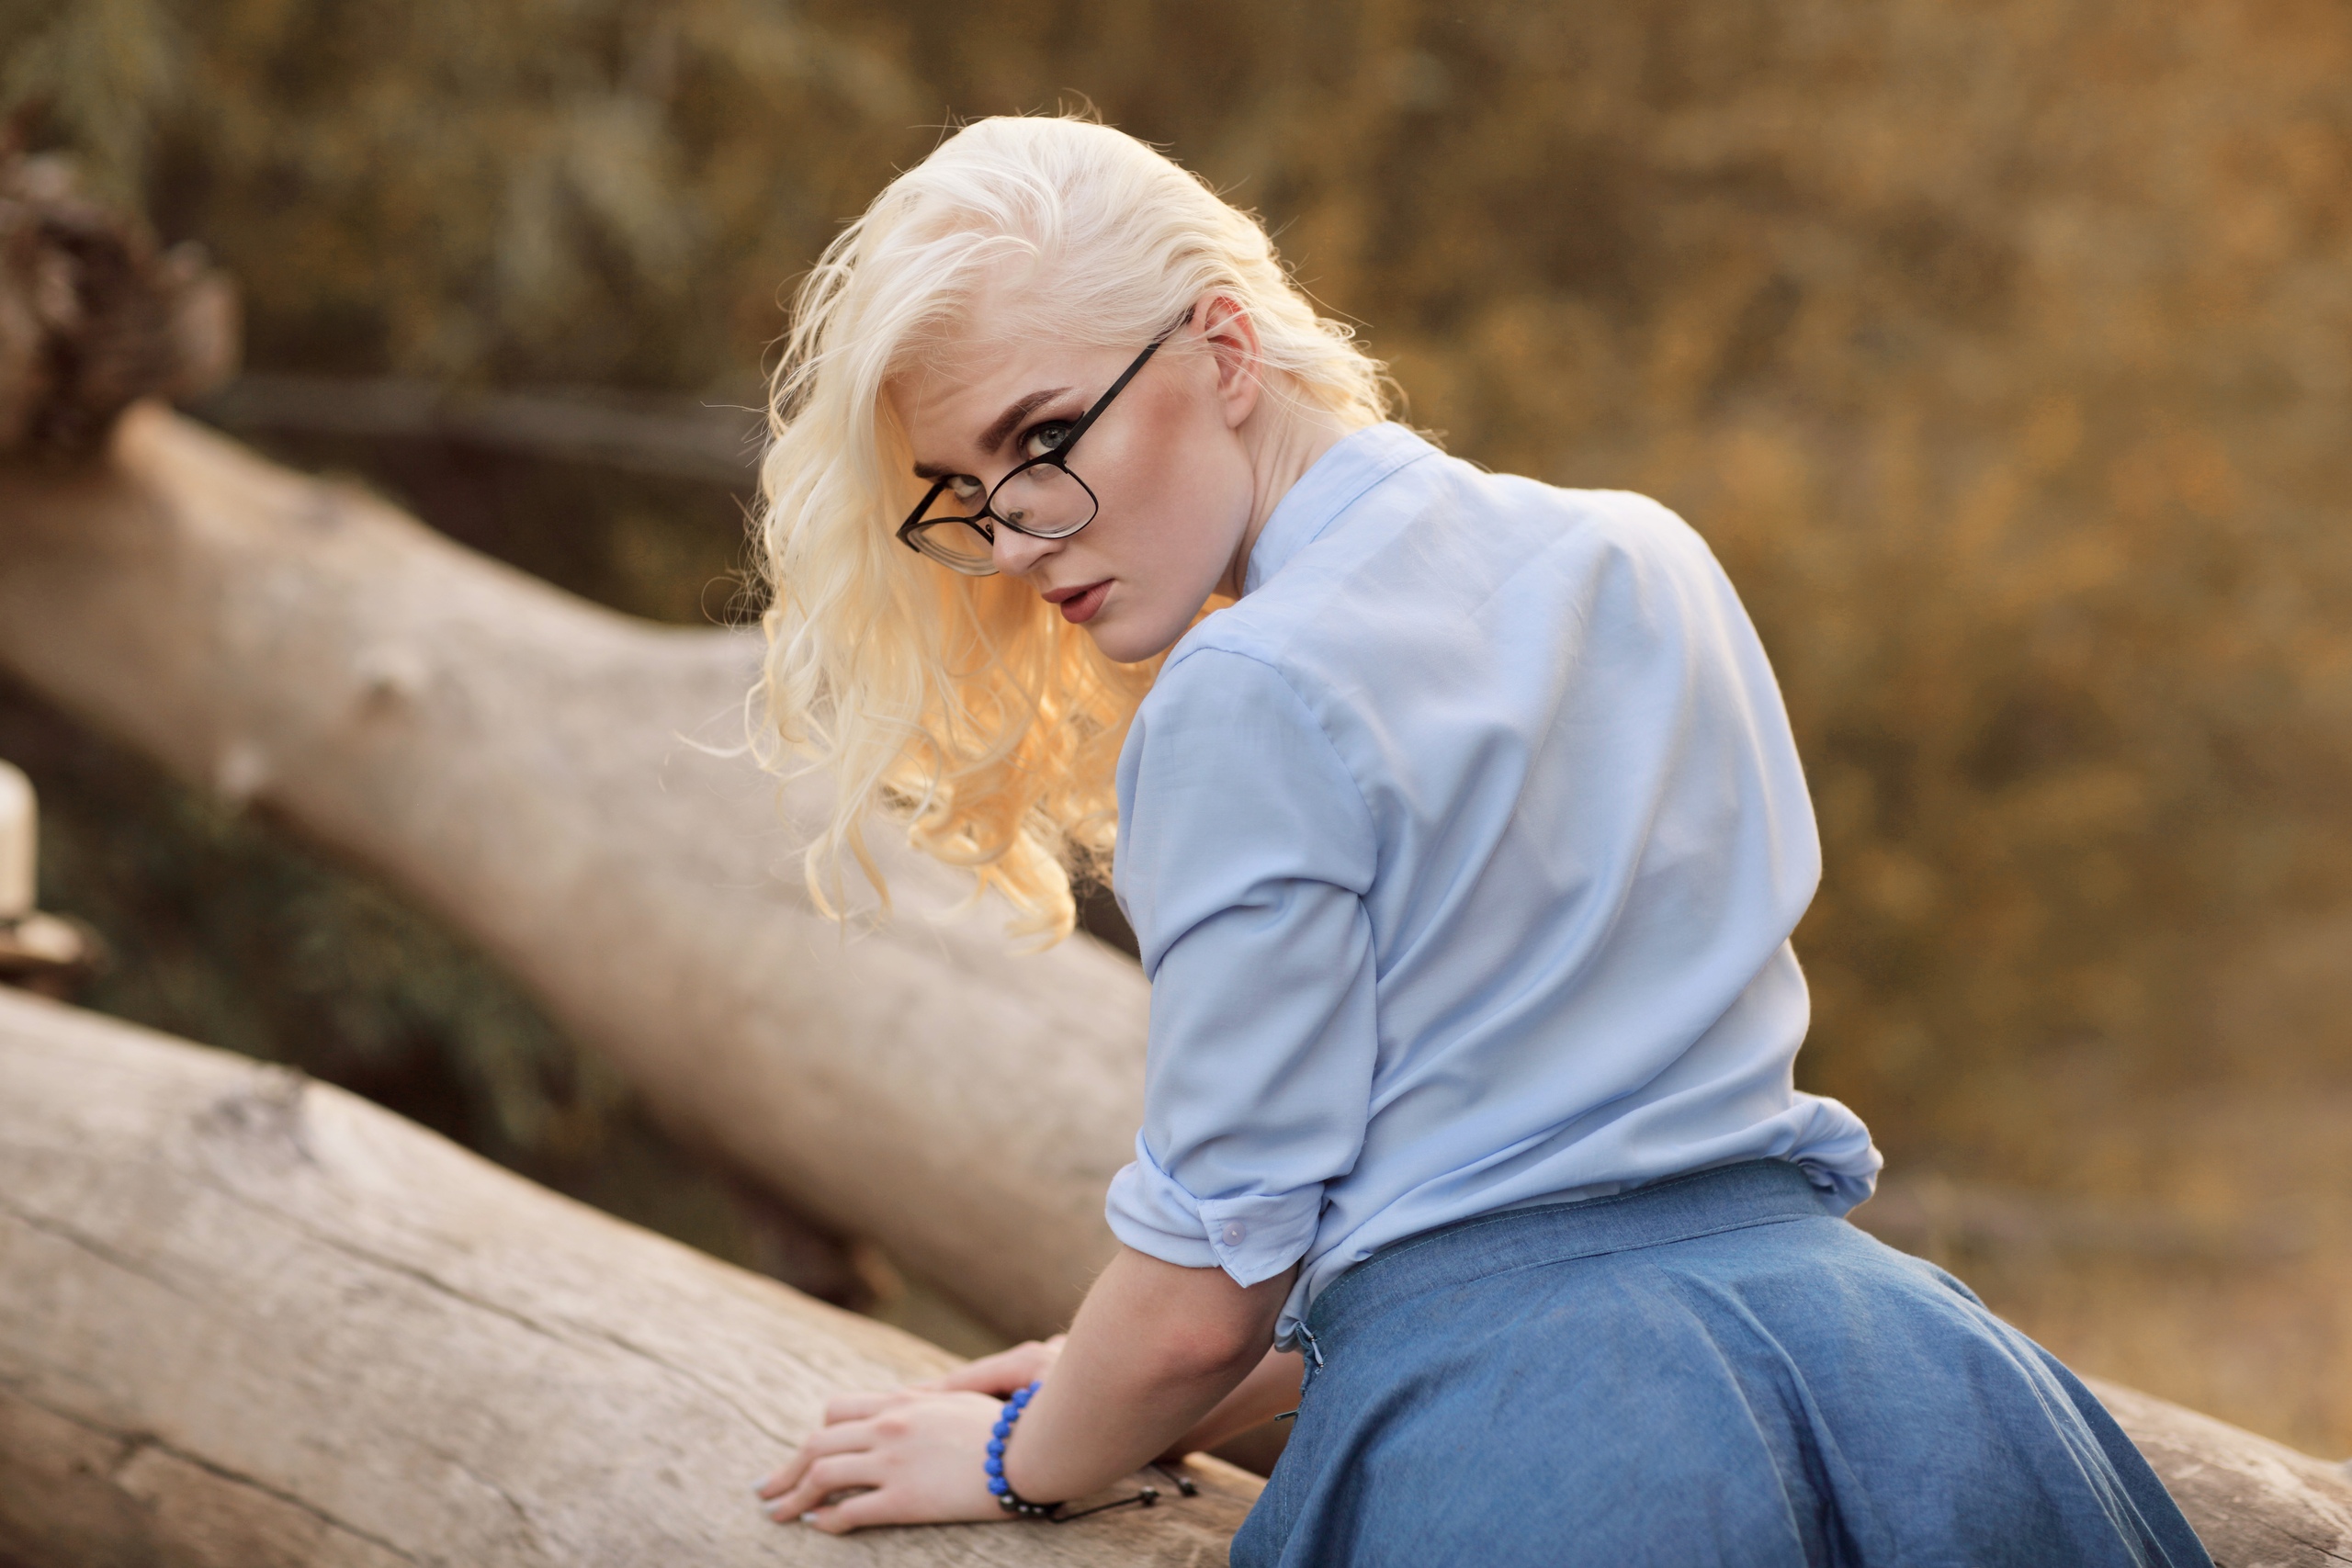 People 2560x1707 Murat Kuzhakhmetov women outdoors women blonde women with glasses makeup face model outdoors glasses wood dyed hair looking into the distance